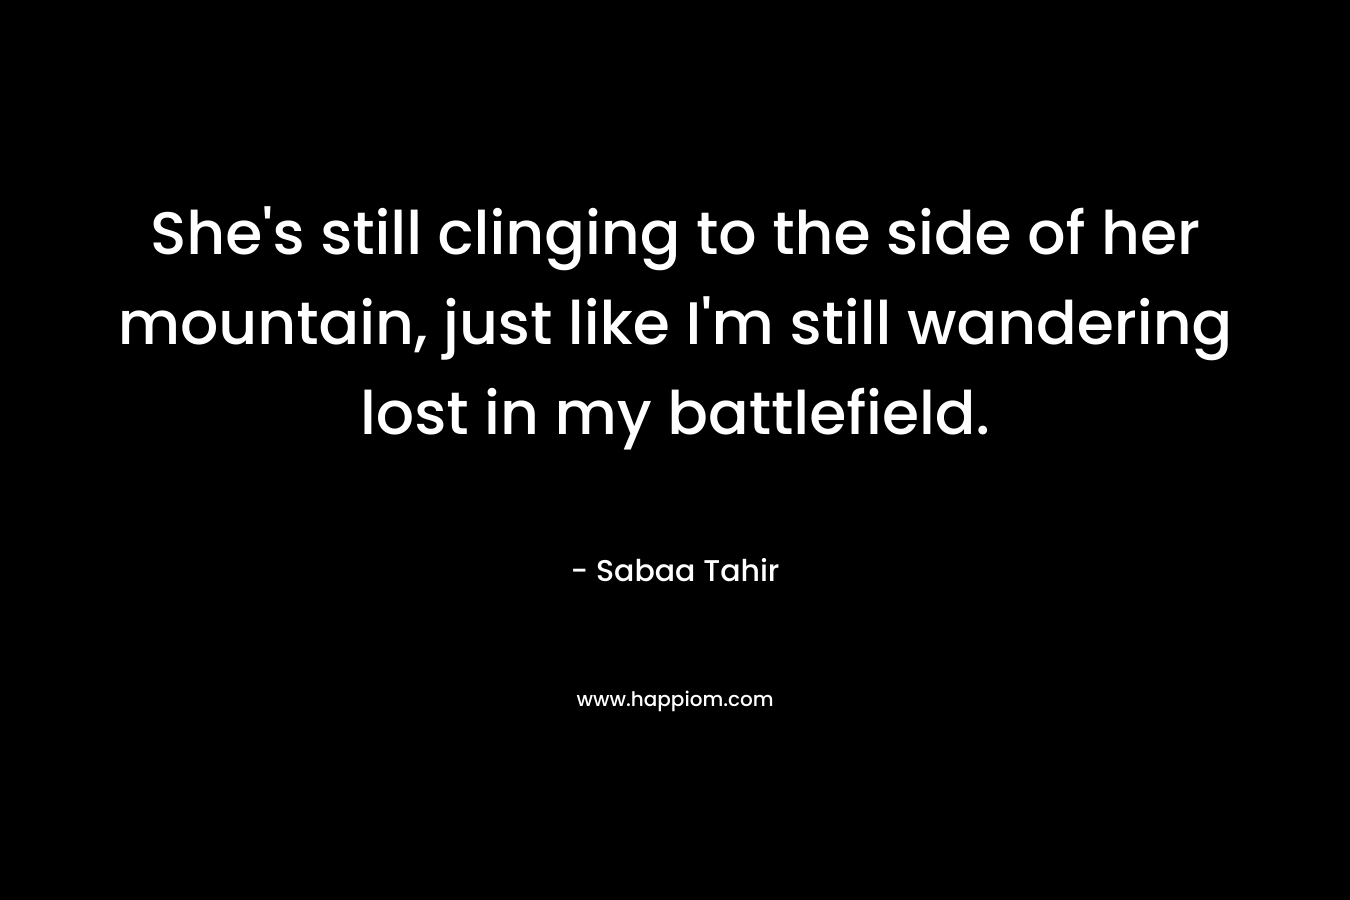 She’s still clinging to the side of her mountain, just like I’m still wandering lost in my battlefield. – Sabaa Tahir